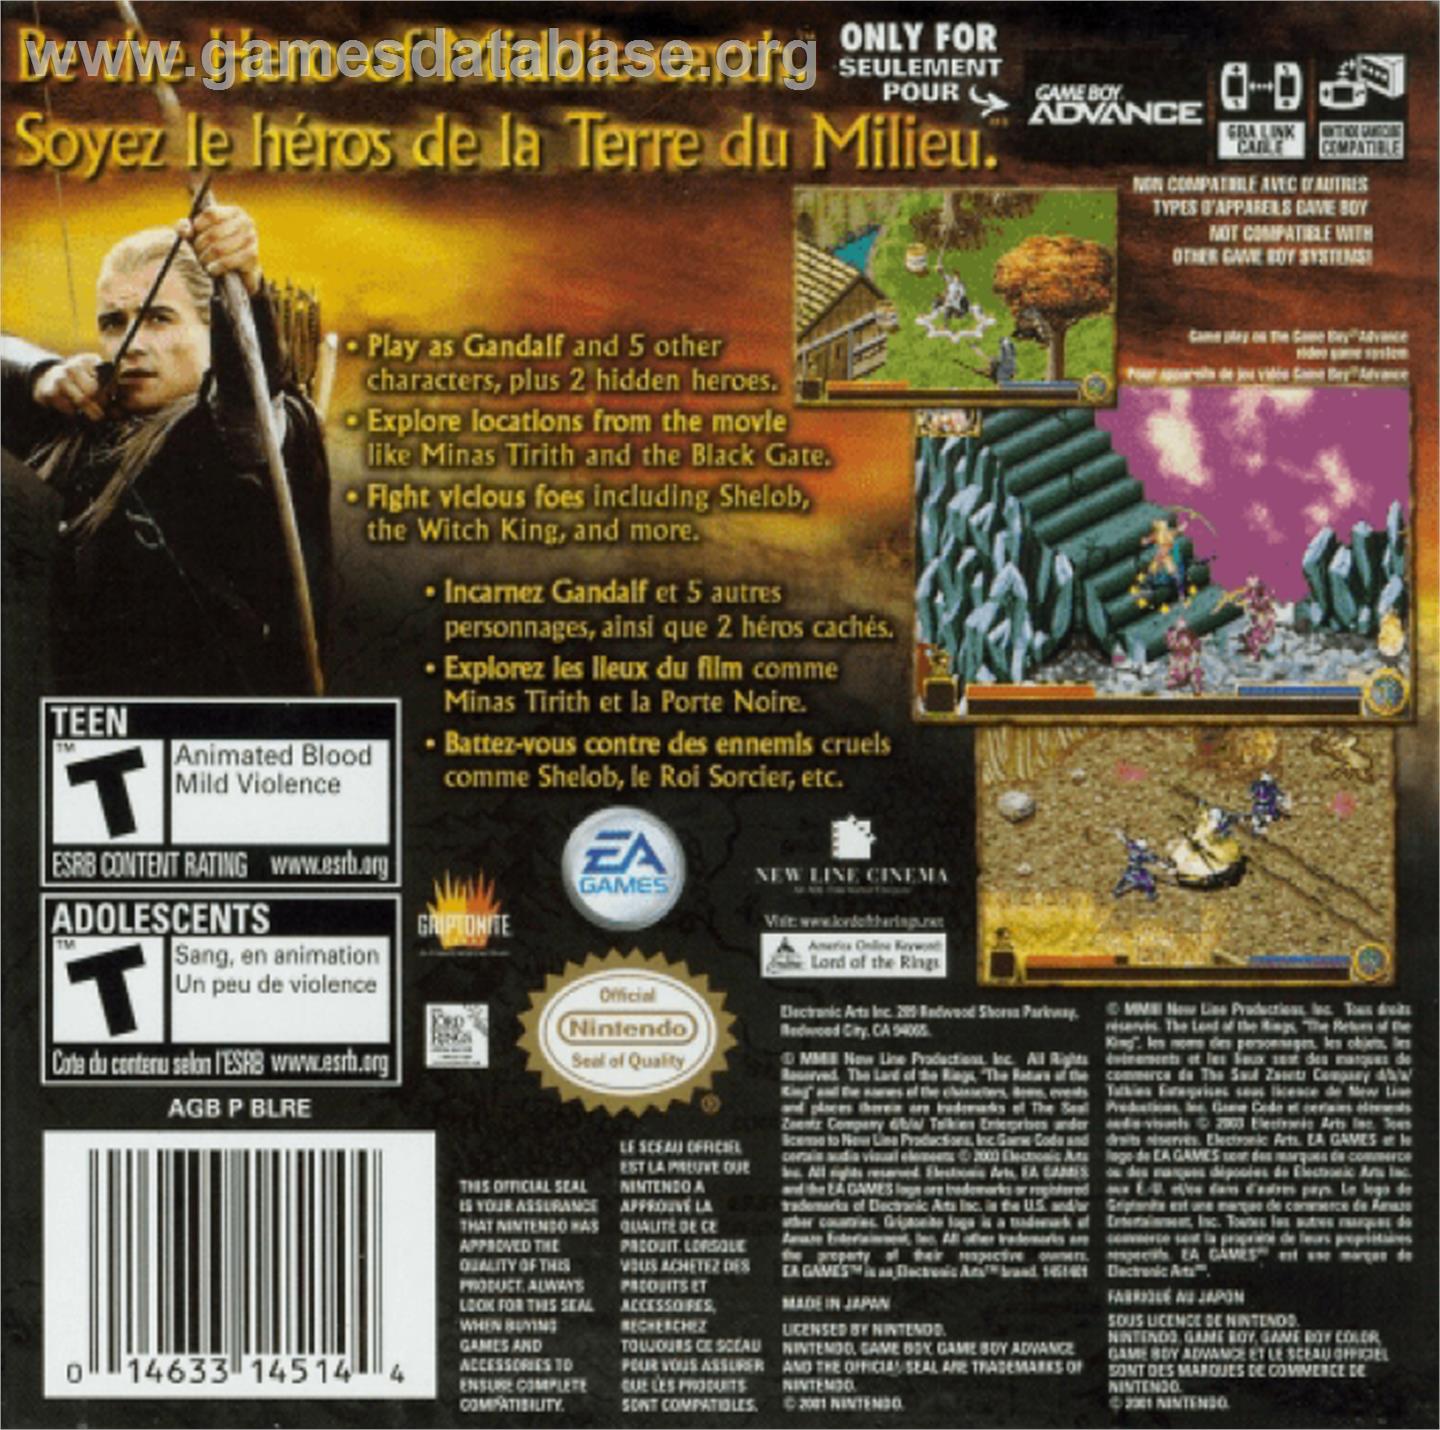 Lord of the Rings: The Return of the King - Nintendo Game Boy Advance - Artwork - Box Back